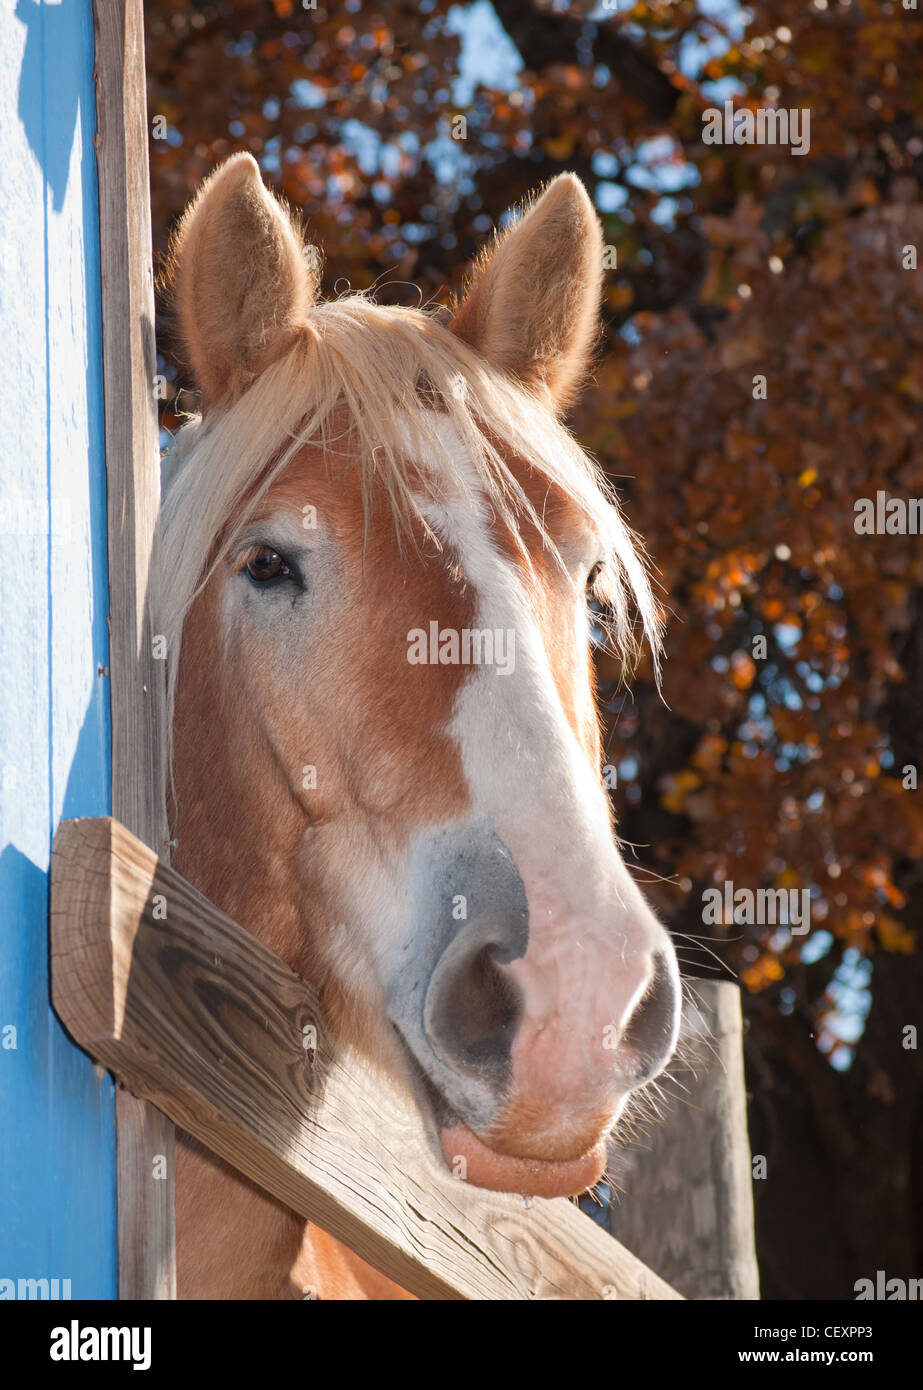 Tall Belgian draft horse peeking at the viewer from behind a blue barn Stock Photo